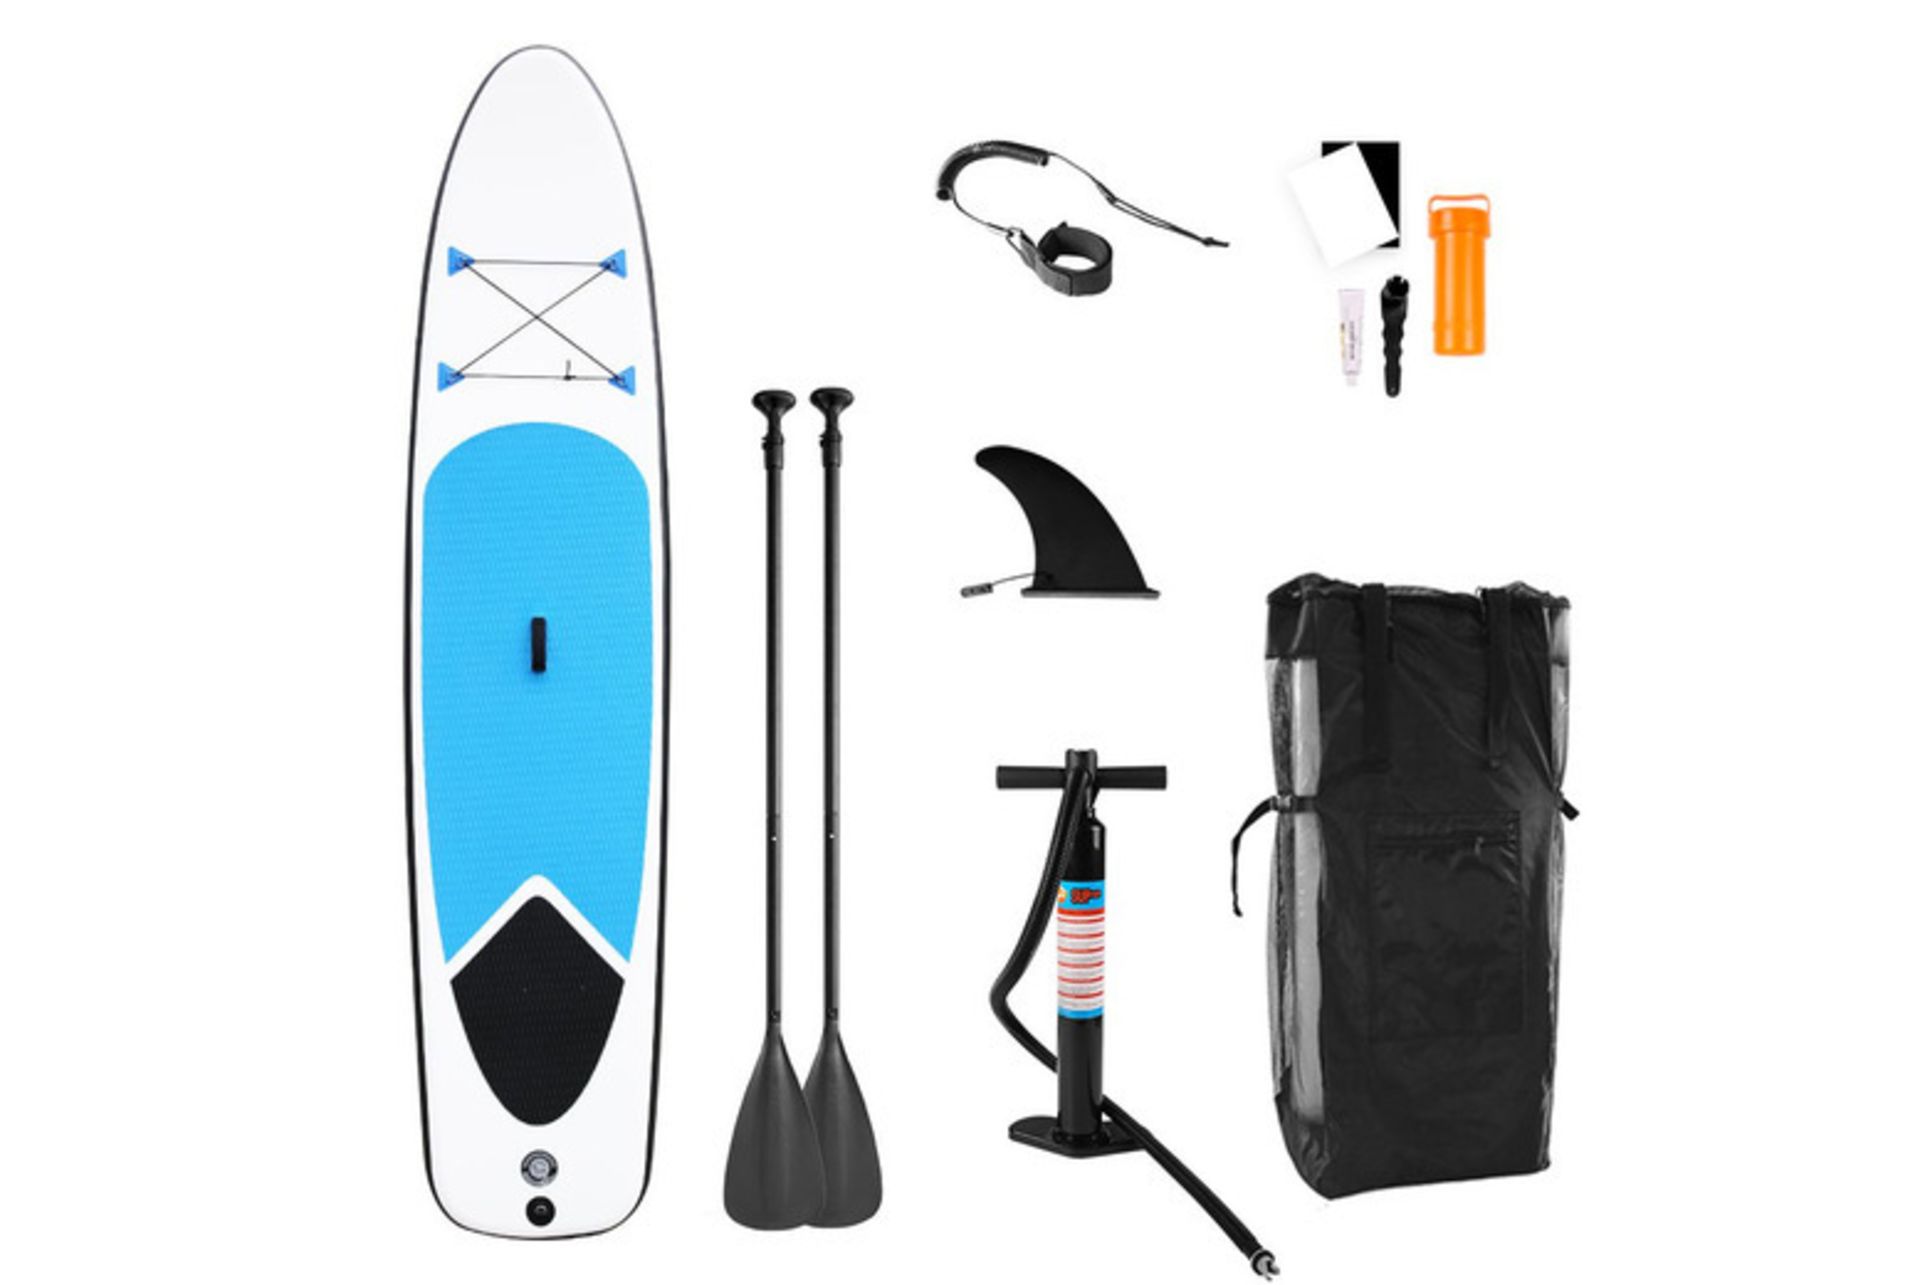 Free Delivery - Job lot of 5x Large 2-person Inflatable Paddle Board w/ Accessories - Blue